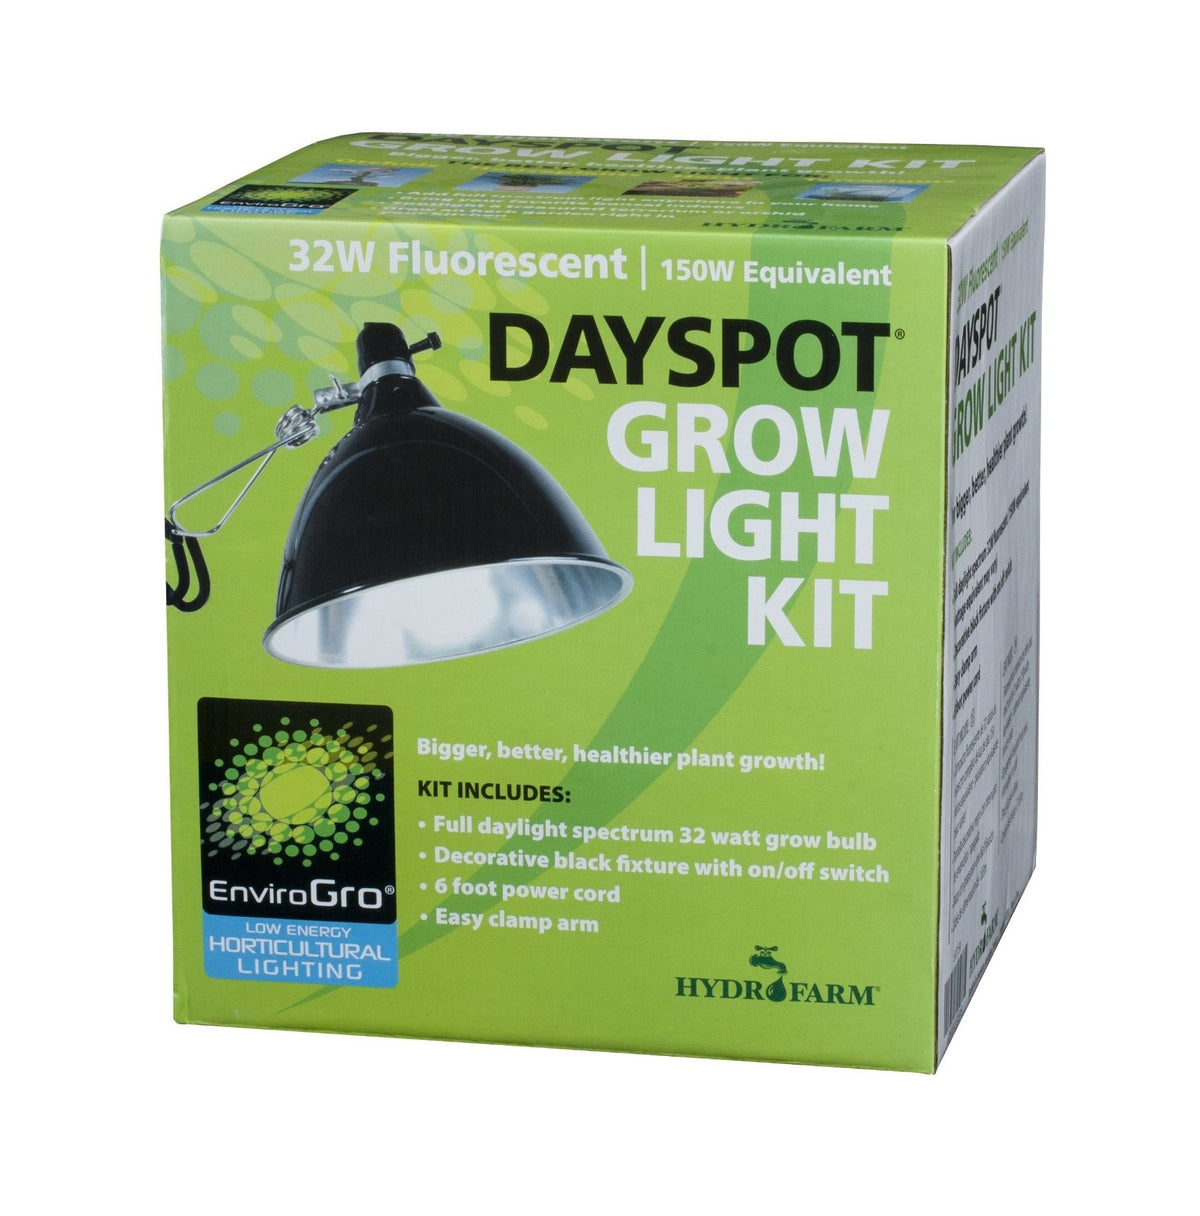 buy growing lights at cheap rate in bulk. wholesale & retail lawn & plant care fertilizers store.